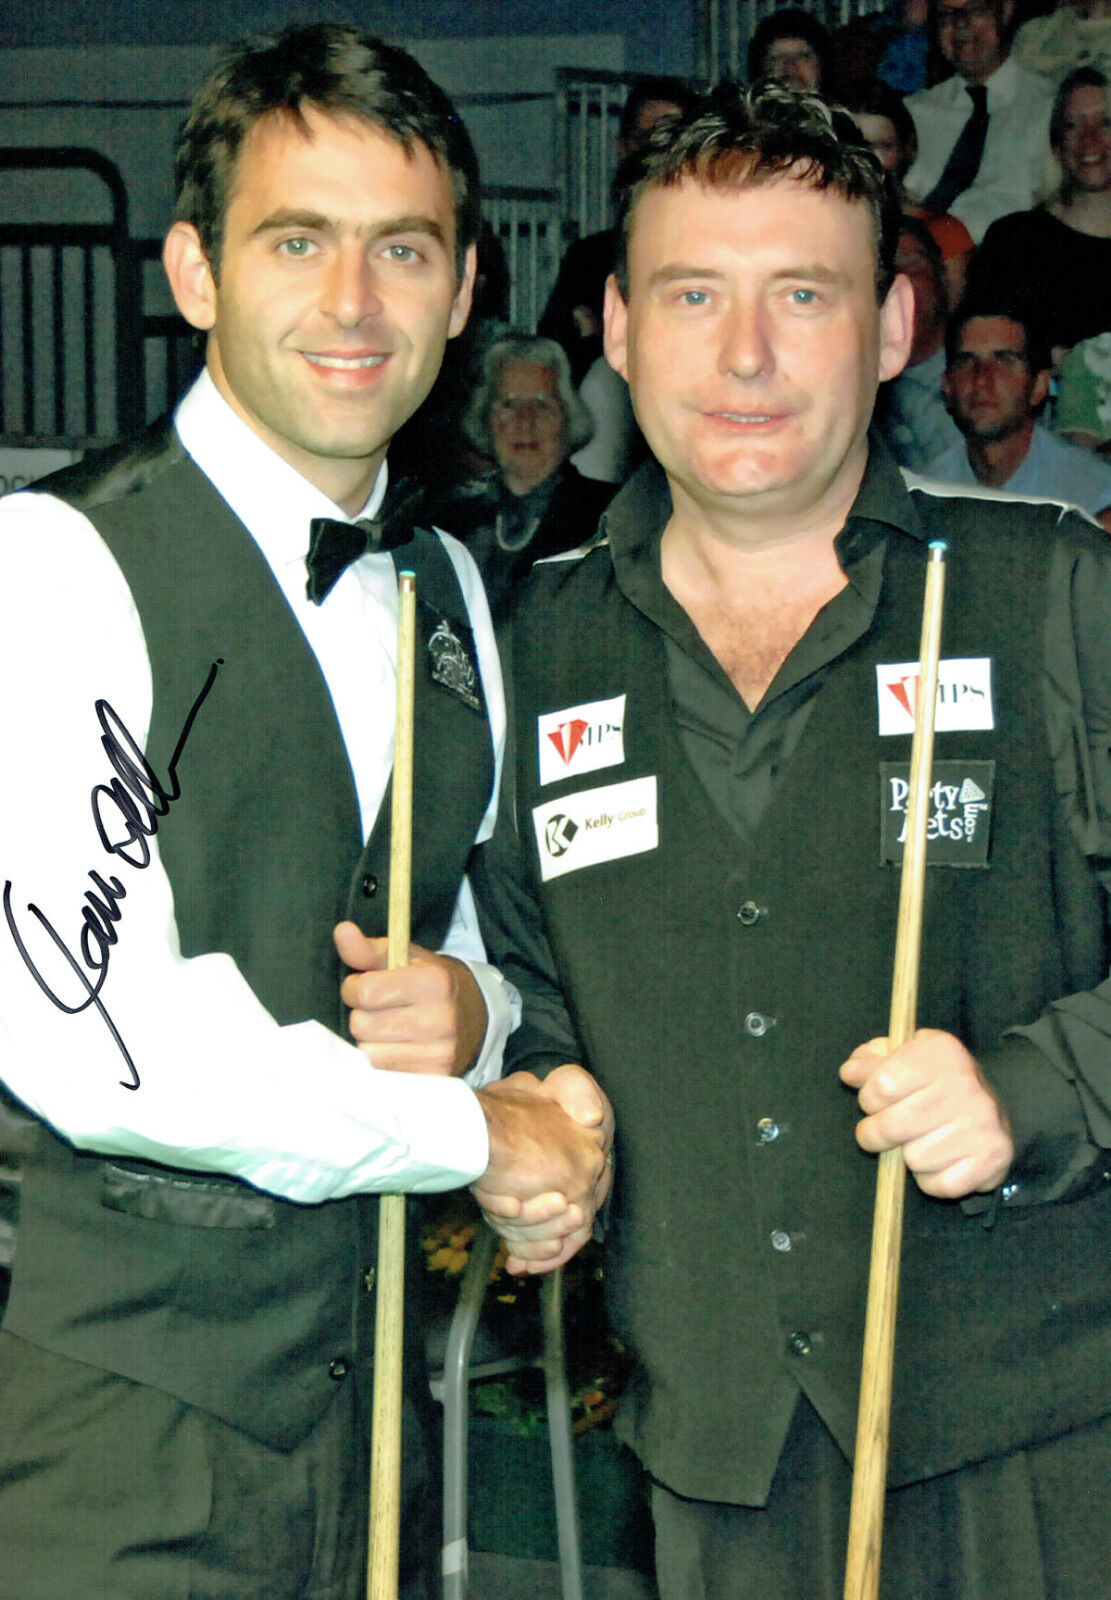 Ronnie O'SULLIVAN Signed Autograph MASSIVE 18x12 RARE Snooker Photo Poster painting AFTAL RD COA